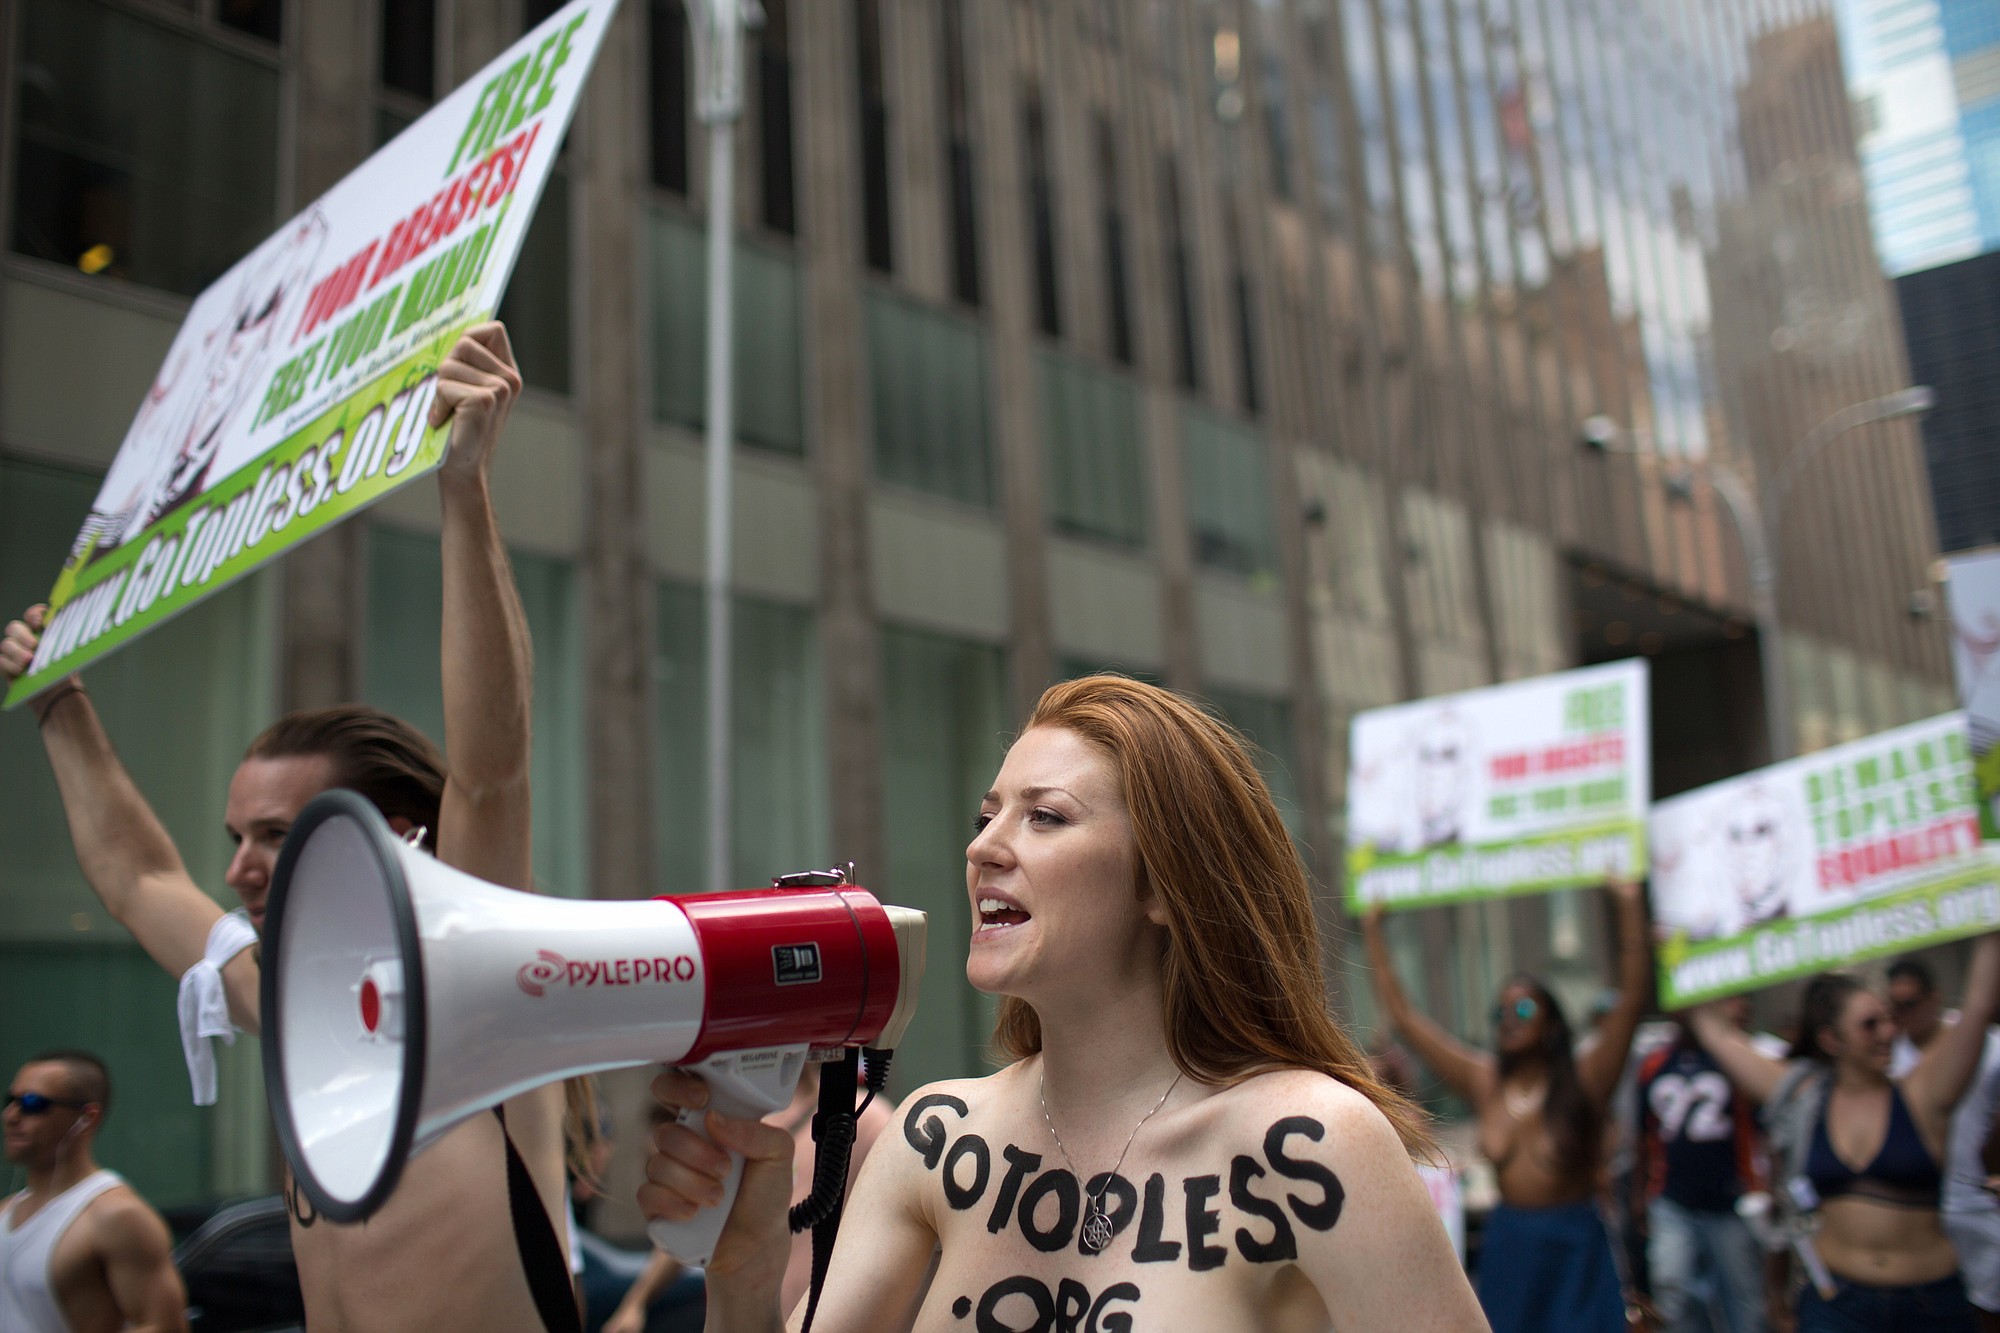 Rachel Jessee speaks into a megaphone while riding atop a car during the GoTopless Day Parade, Sunday, Aug. 23, 2015, in New York. The parade took to the streets to counter critics who are complaining about topless tip-seekers in Times Square. Appearing bare-breasted is legal in New York. But Mayor Bill de Blasio and police Commissioner Bill Bratton say the body-painted women in the square who take photos with tourists are a nuisance.